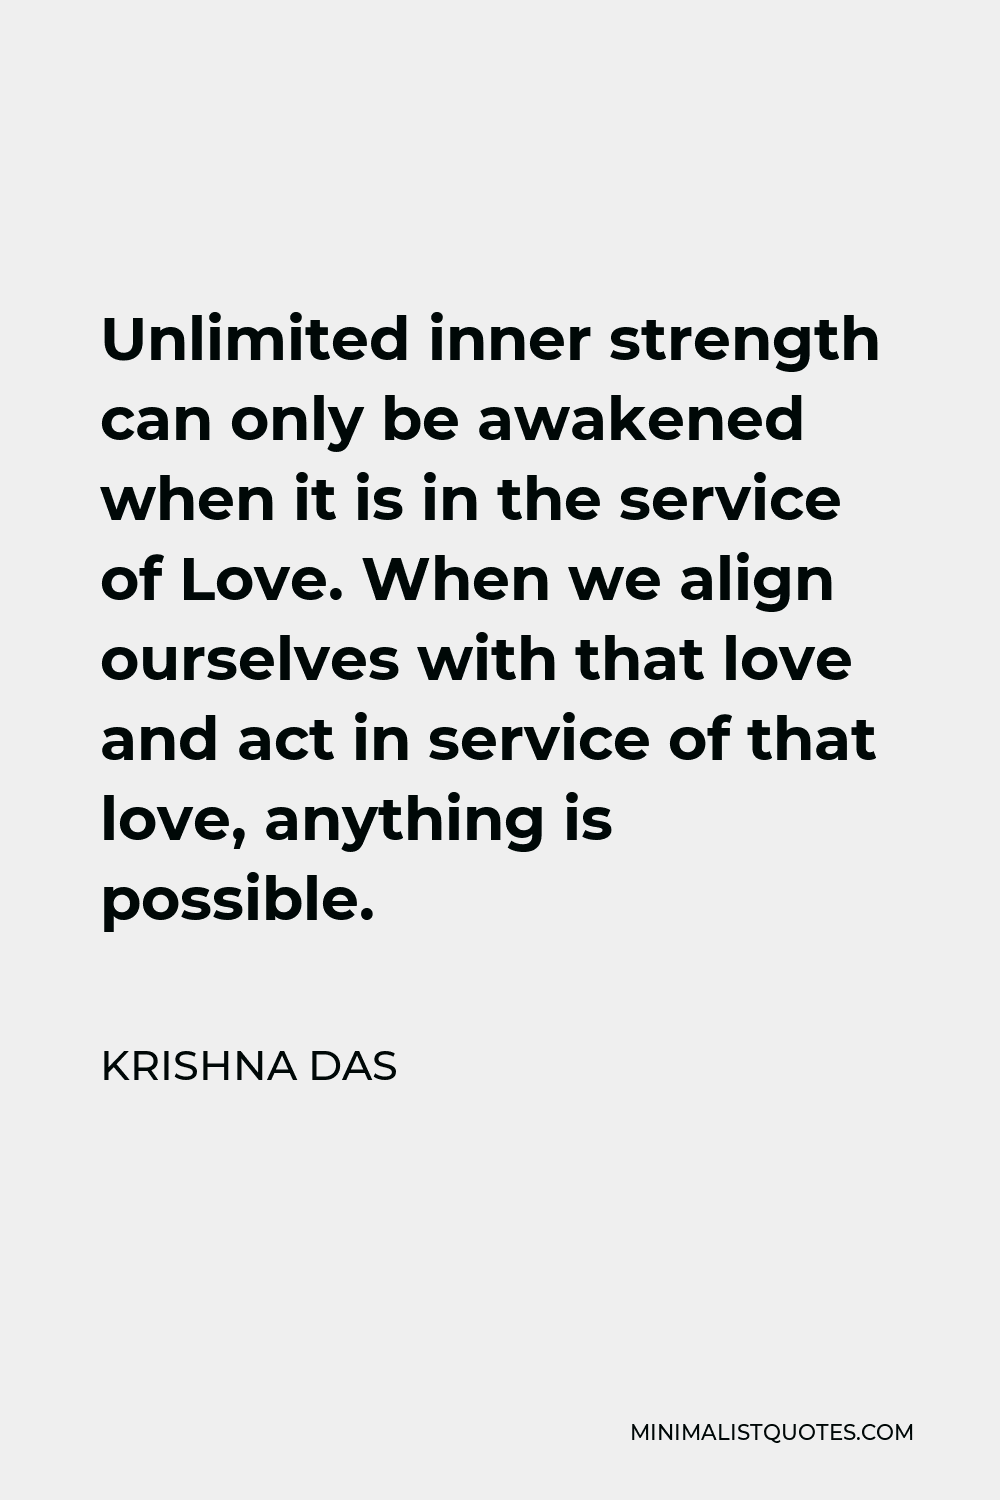 Krishna Das Quote - Unlimited inner strength can only be awakened when it is in the service of Love. When we align ourselves with that love and act in service of that love, anything is possible.